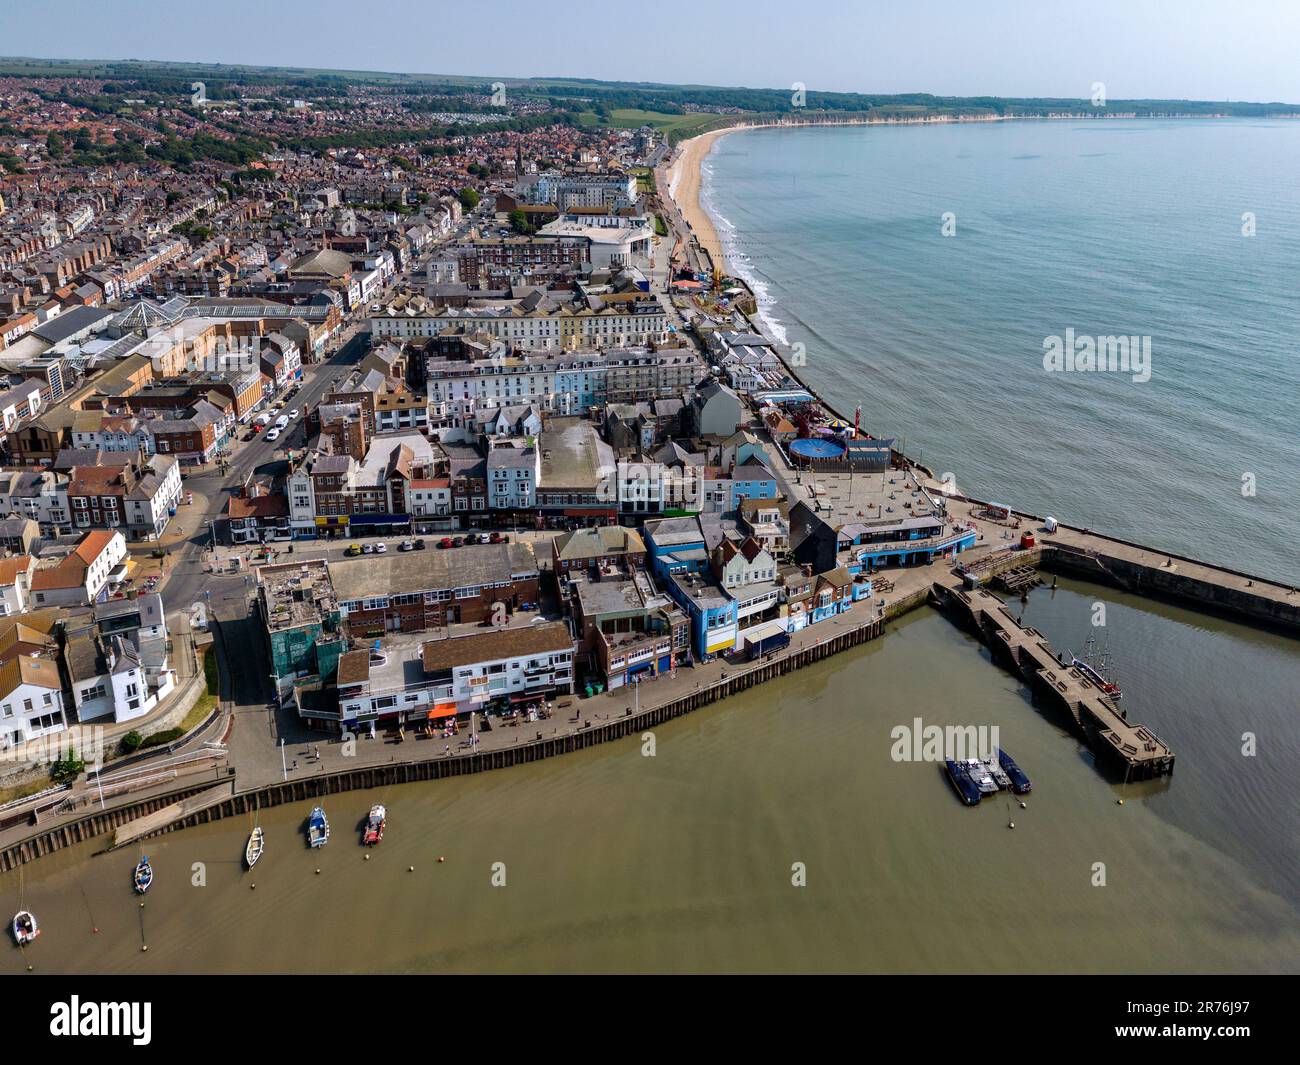 Aerial view of the seaside town of Bridlington on the North Yorkshire coast in the United Kingdom. Stock Photo